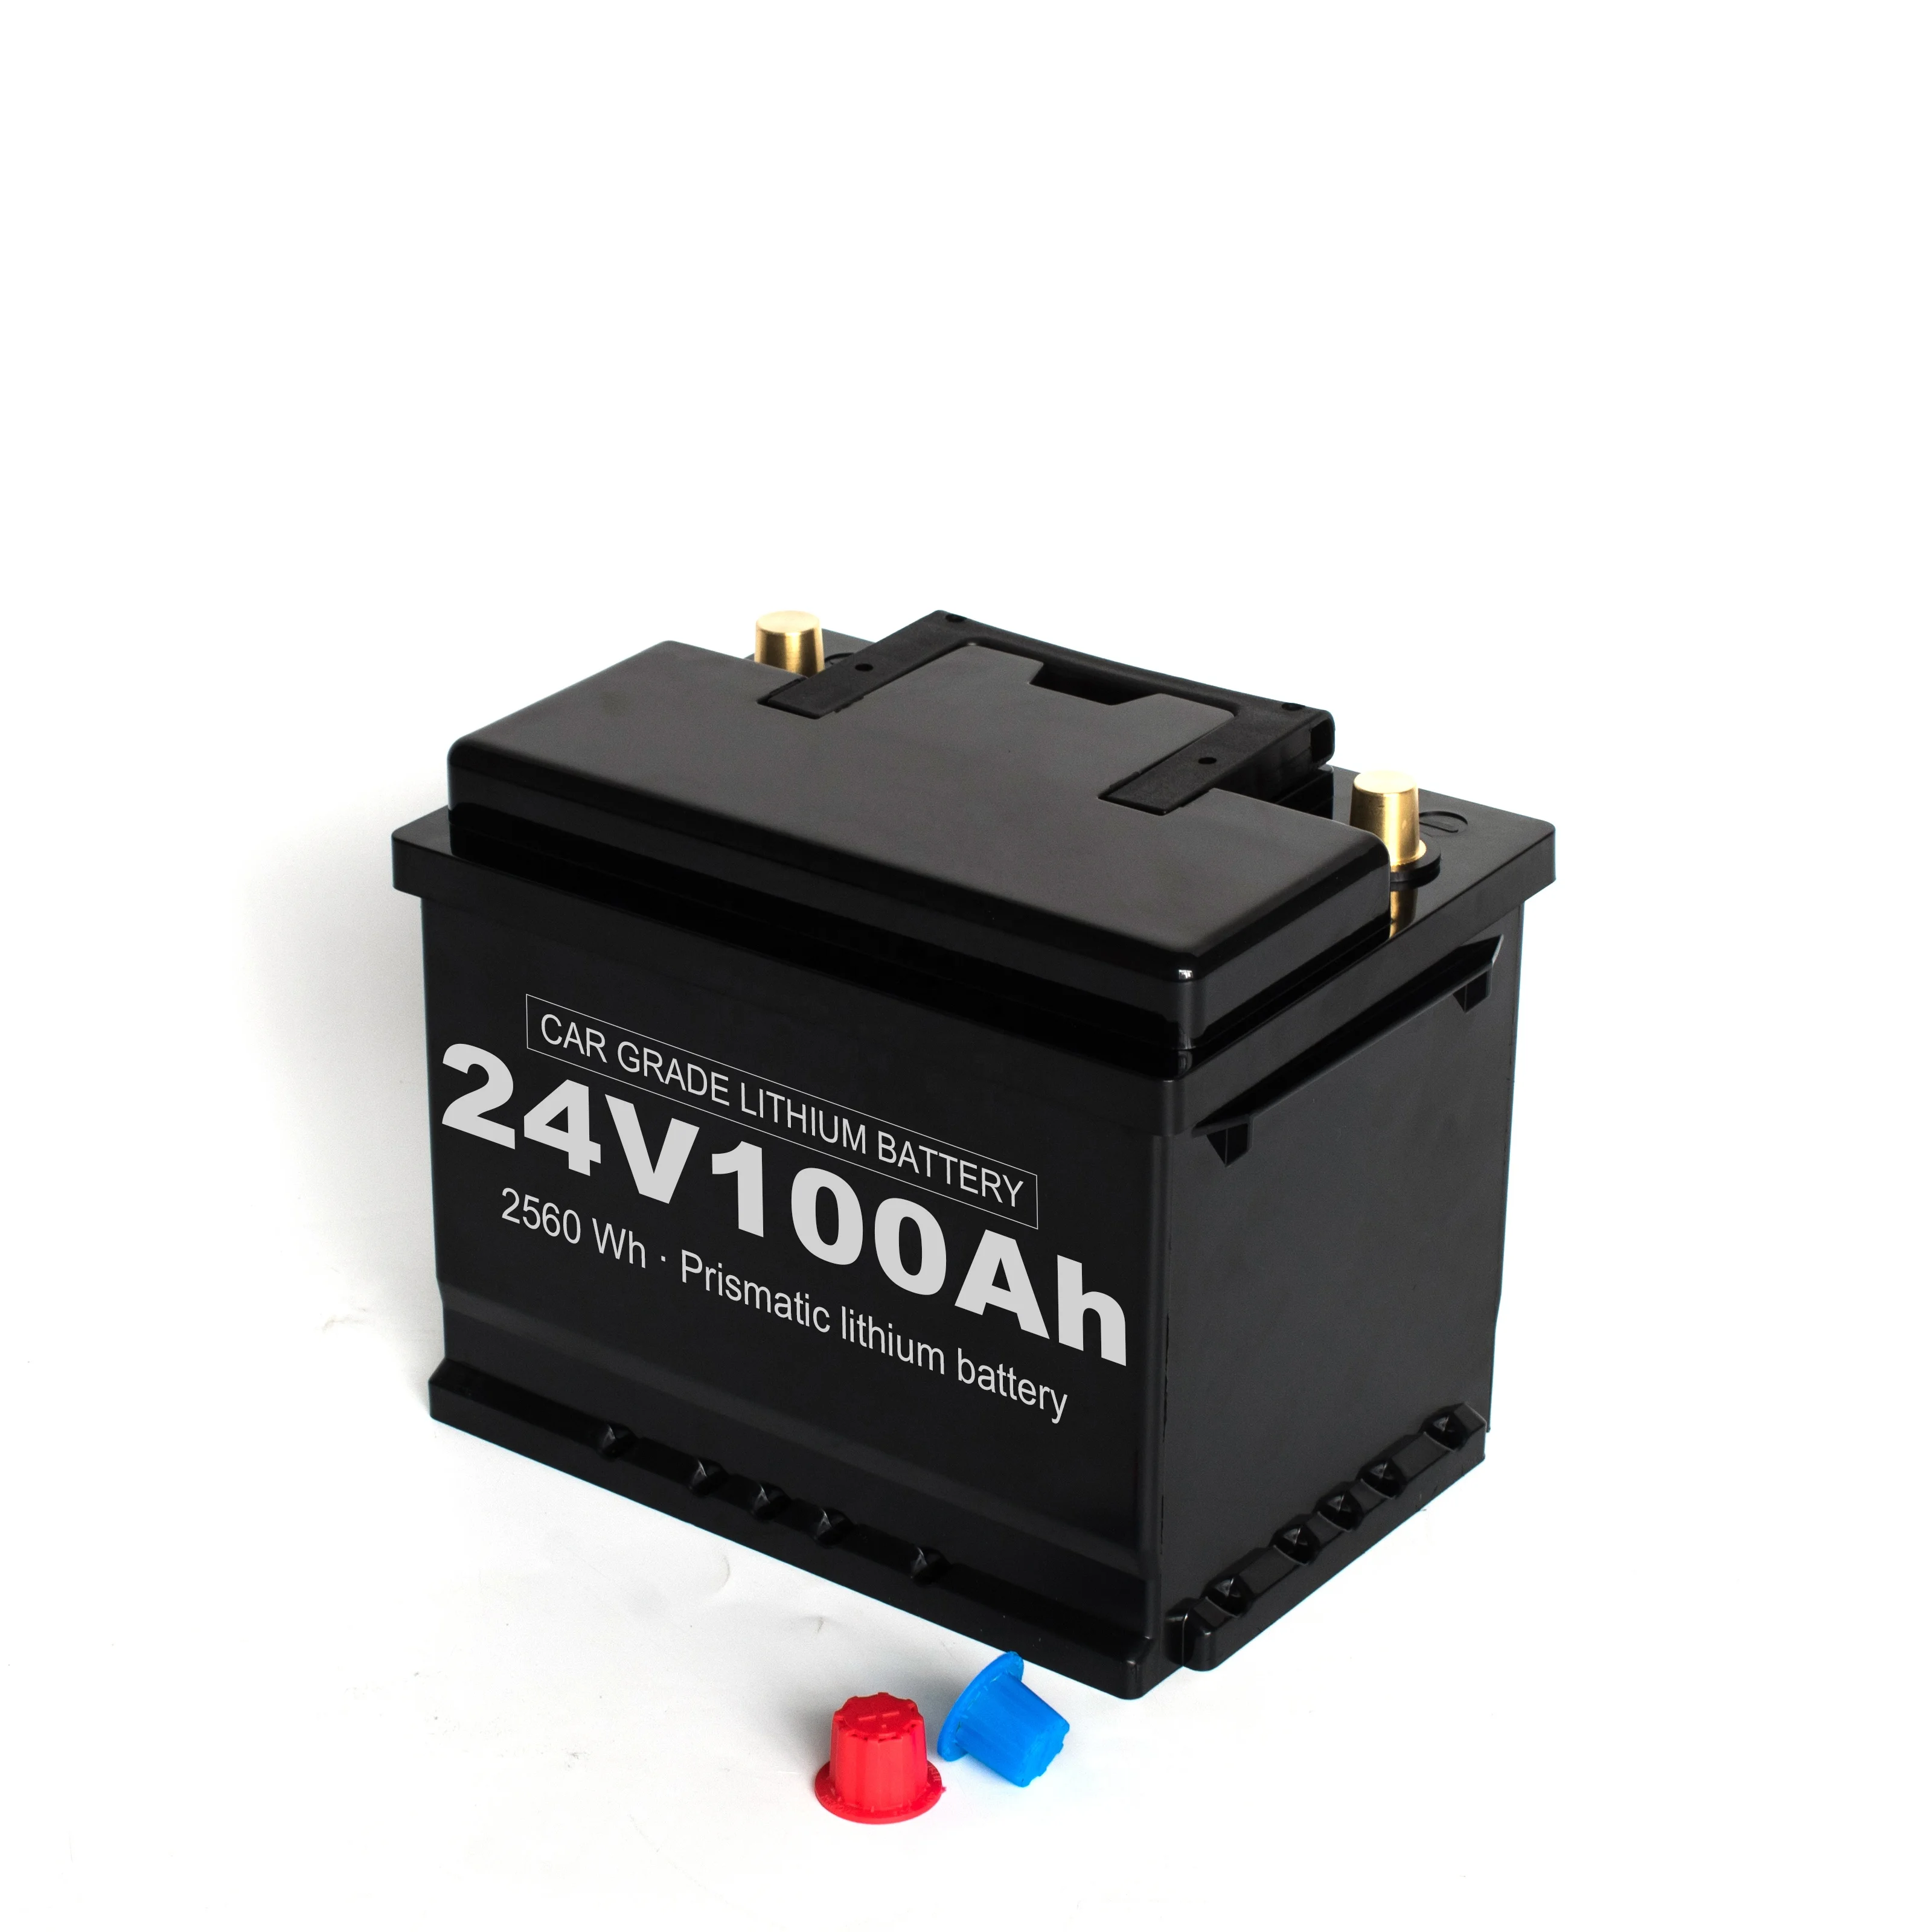 Amazon sells 24v 100ah lithium battery  100ah lithium ion battery for solar power